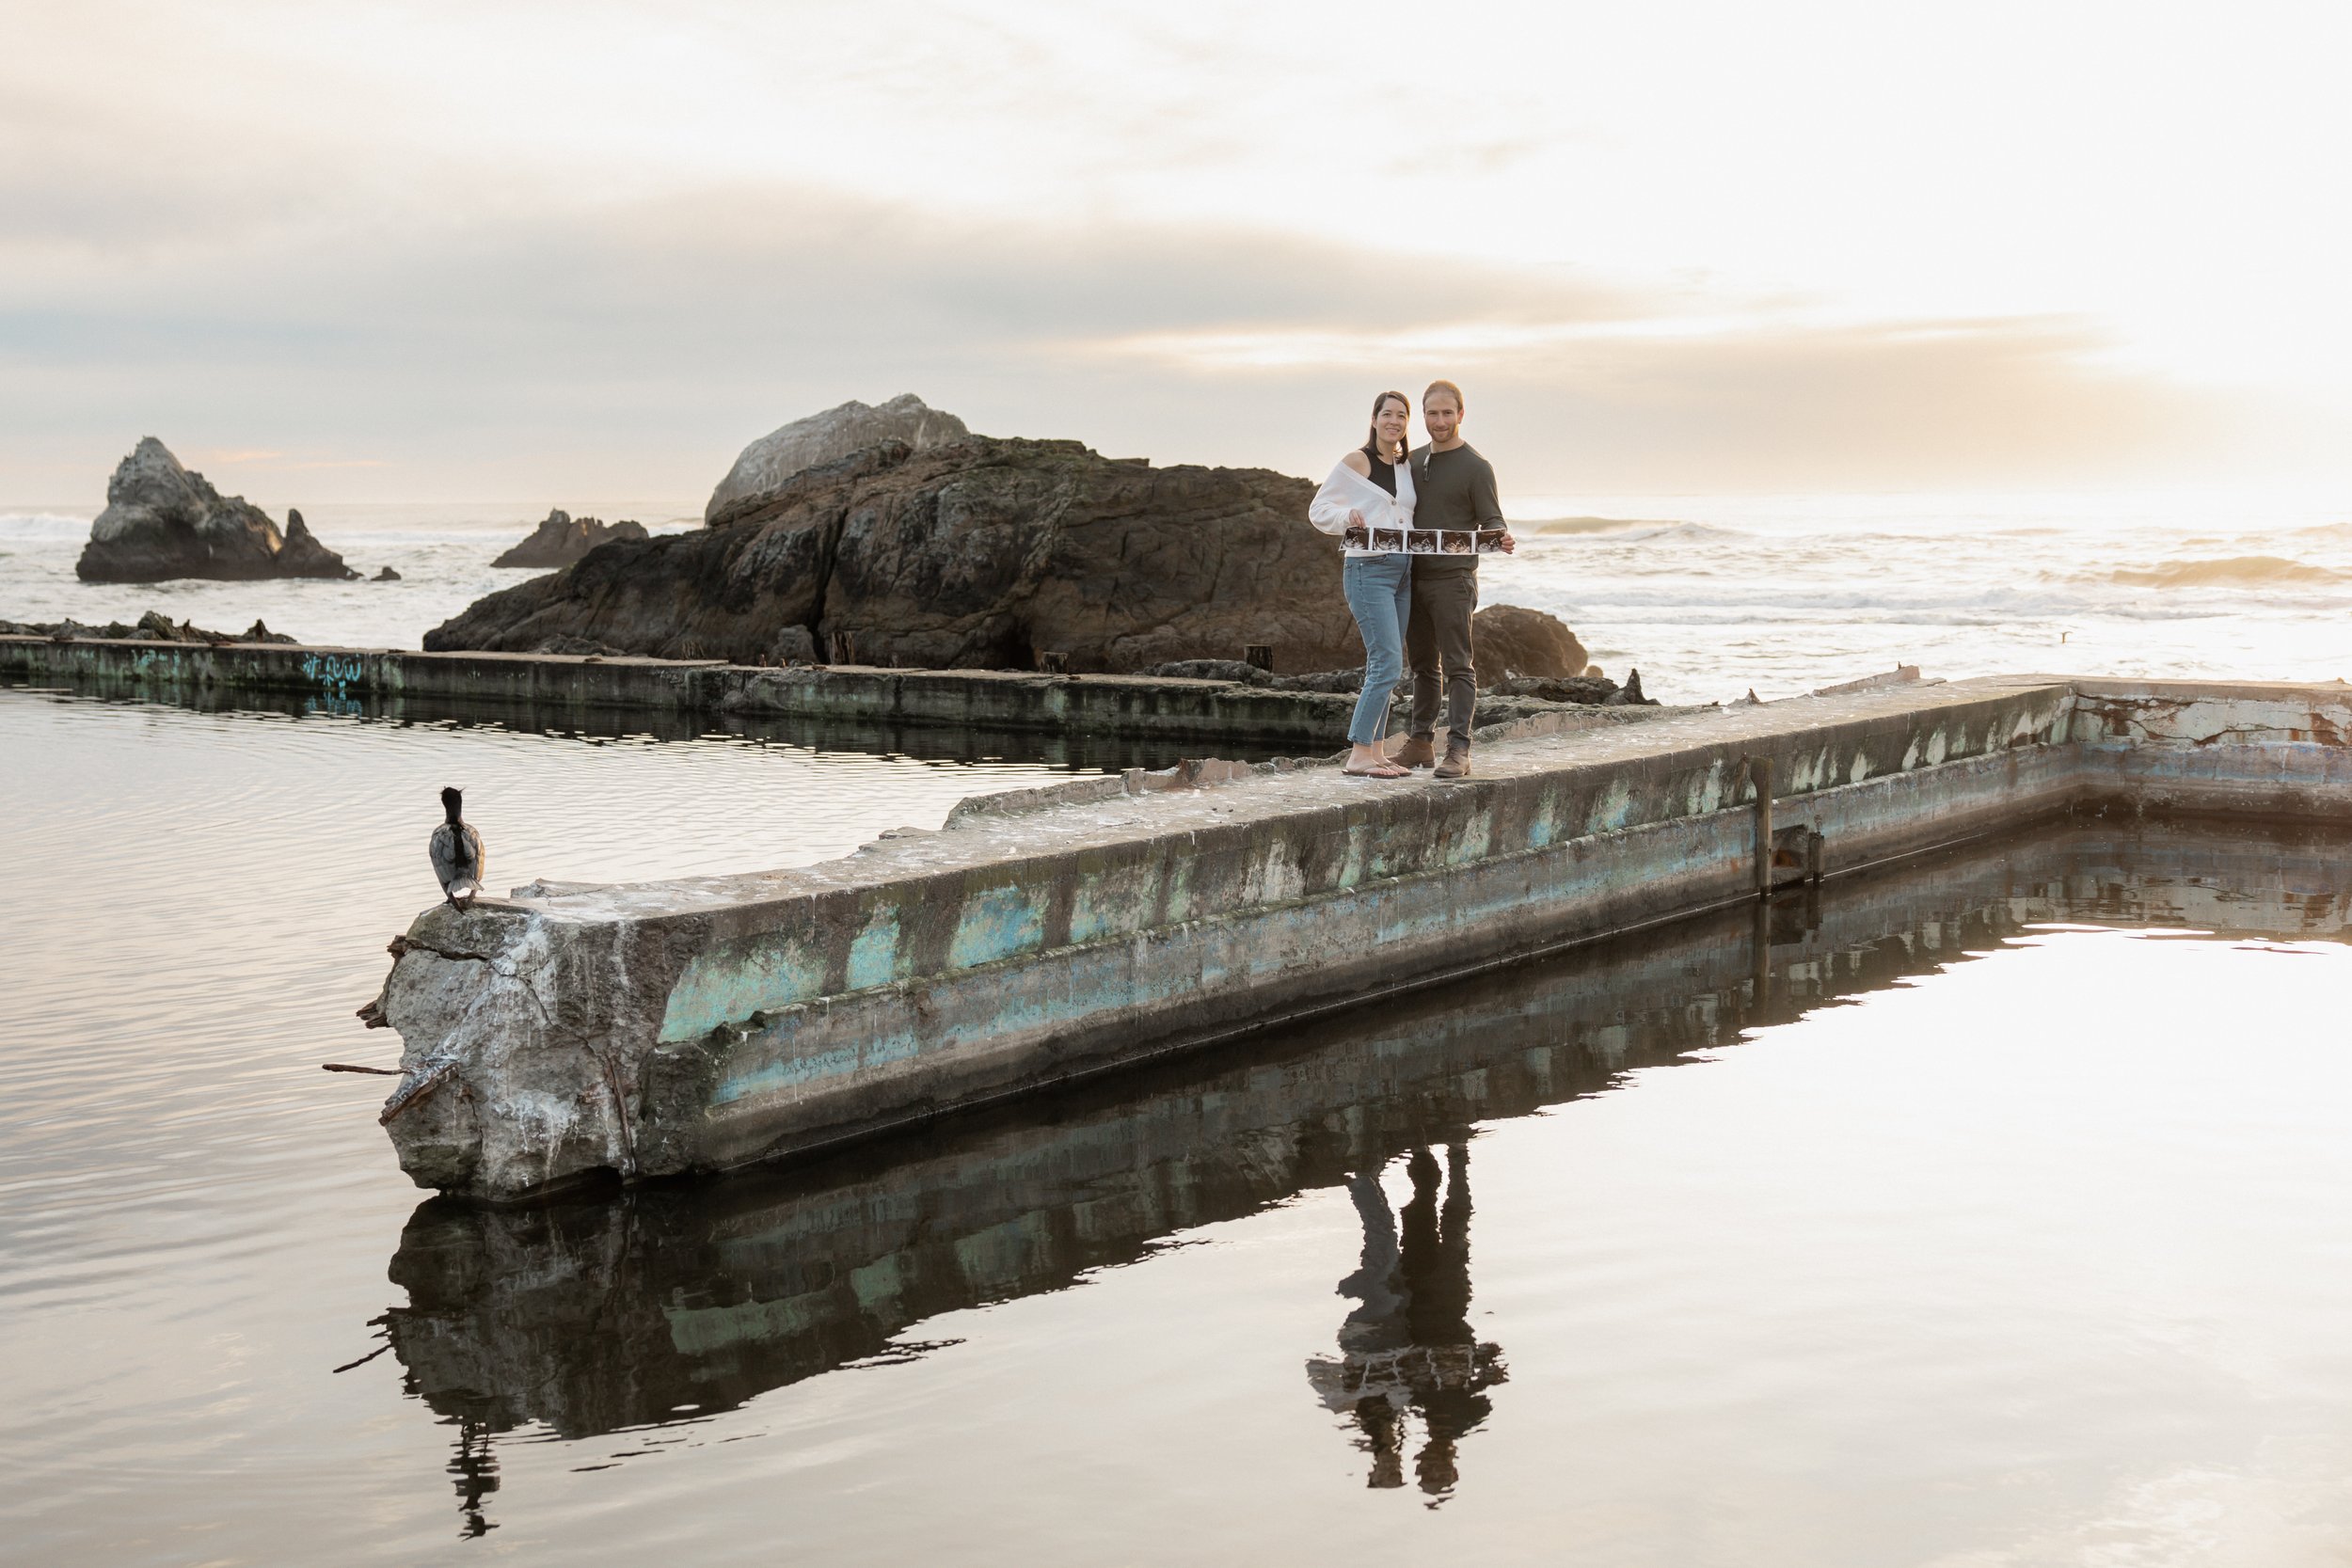 Parents to be with their ultrasound pictures at Sutro Baths in San Francisco